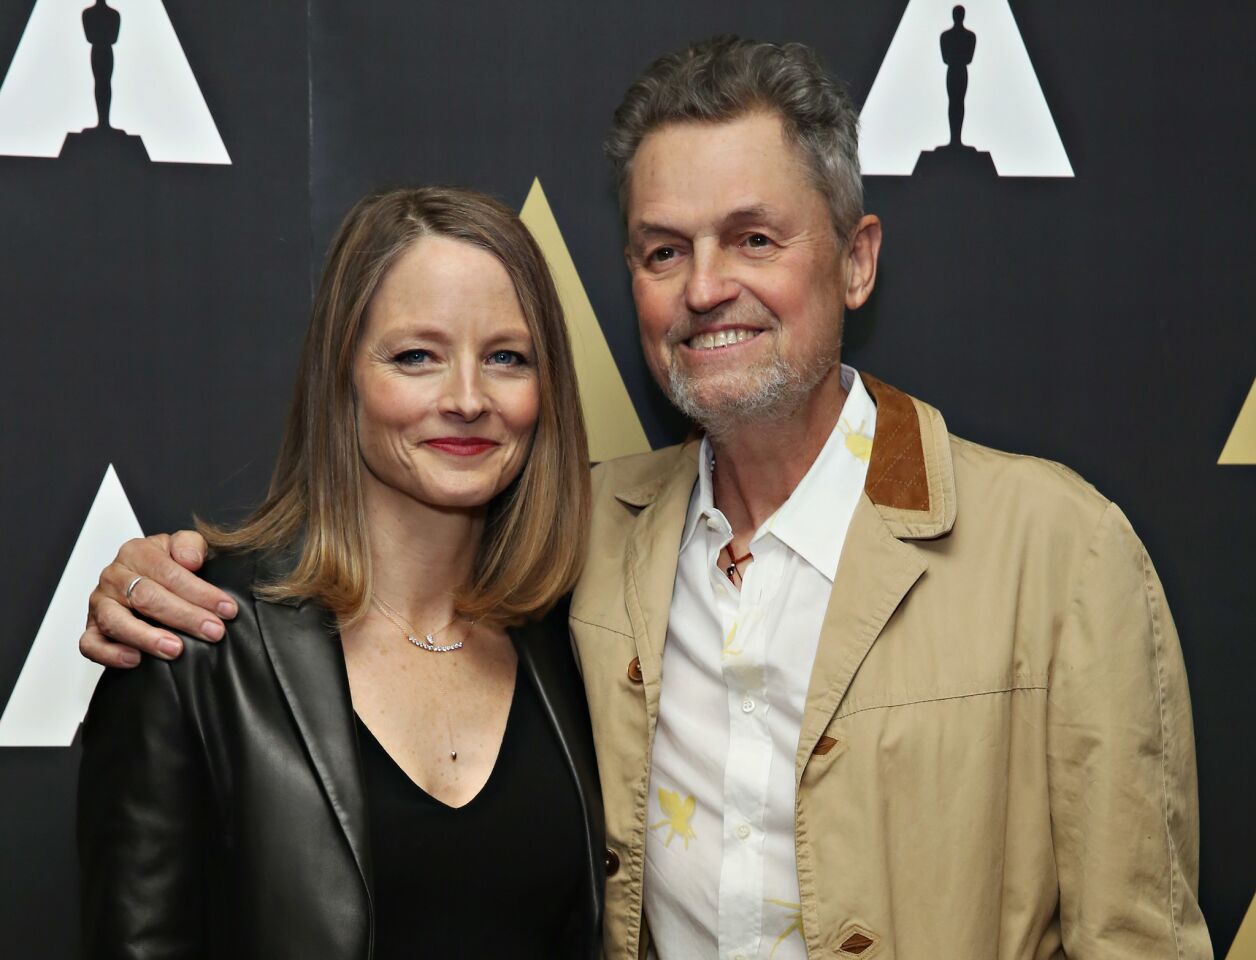 Jonathan Demme and Jodie Foster